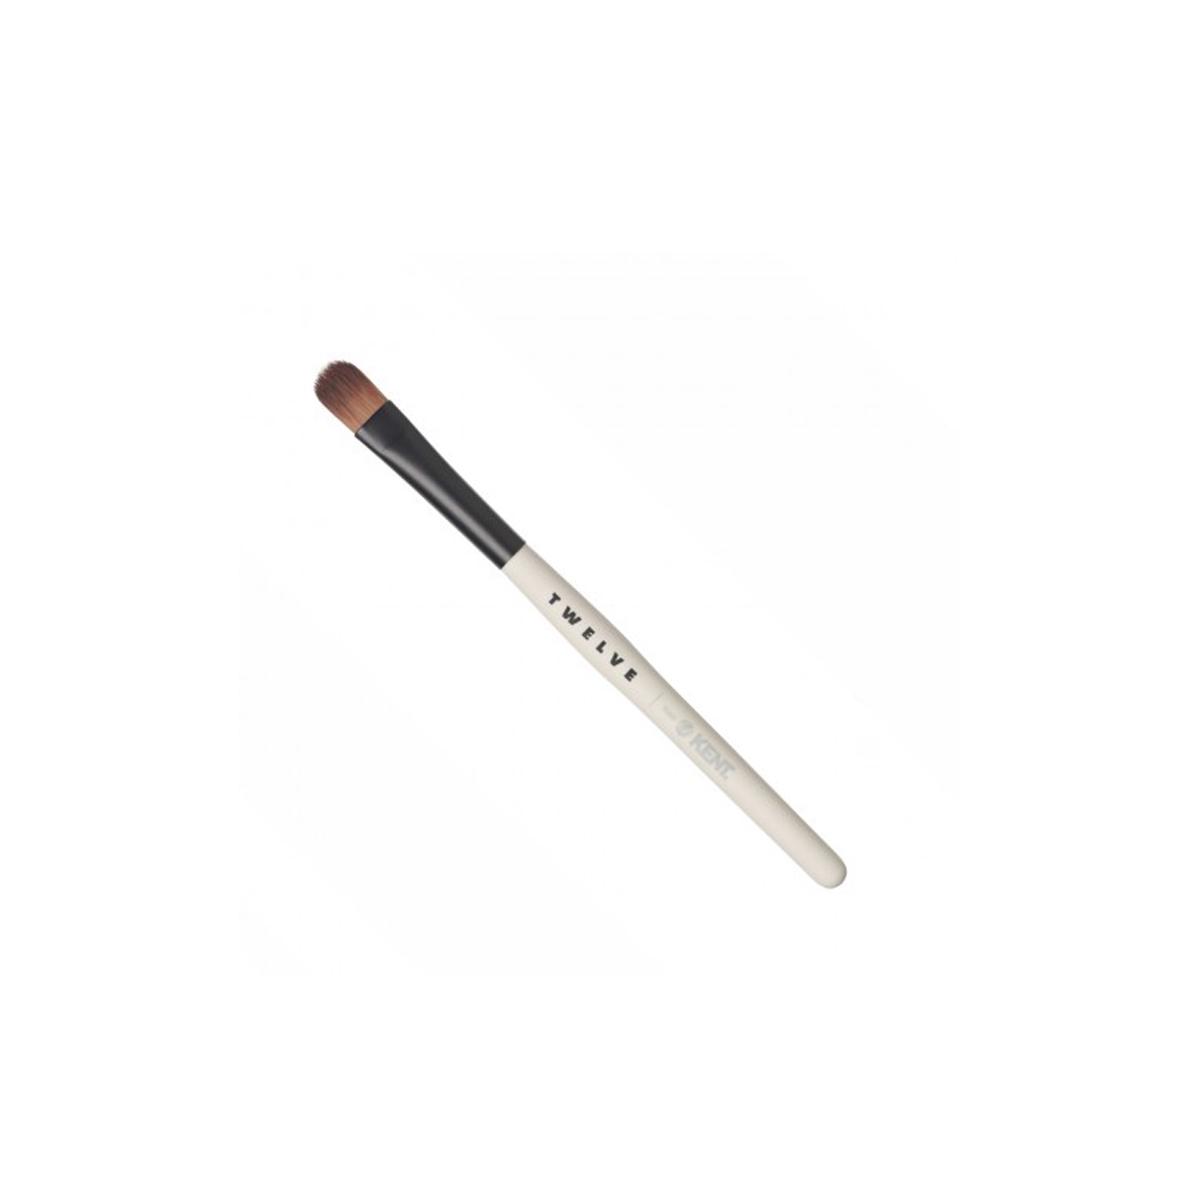 Primary image of 07 Concealer Brush